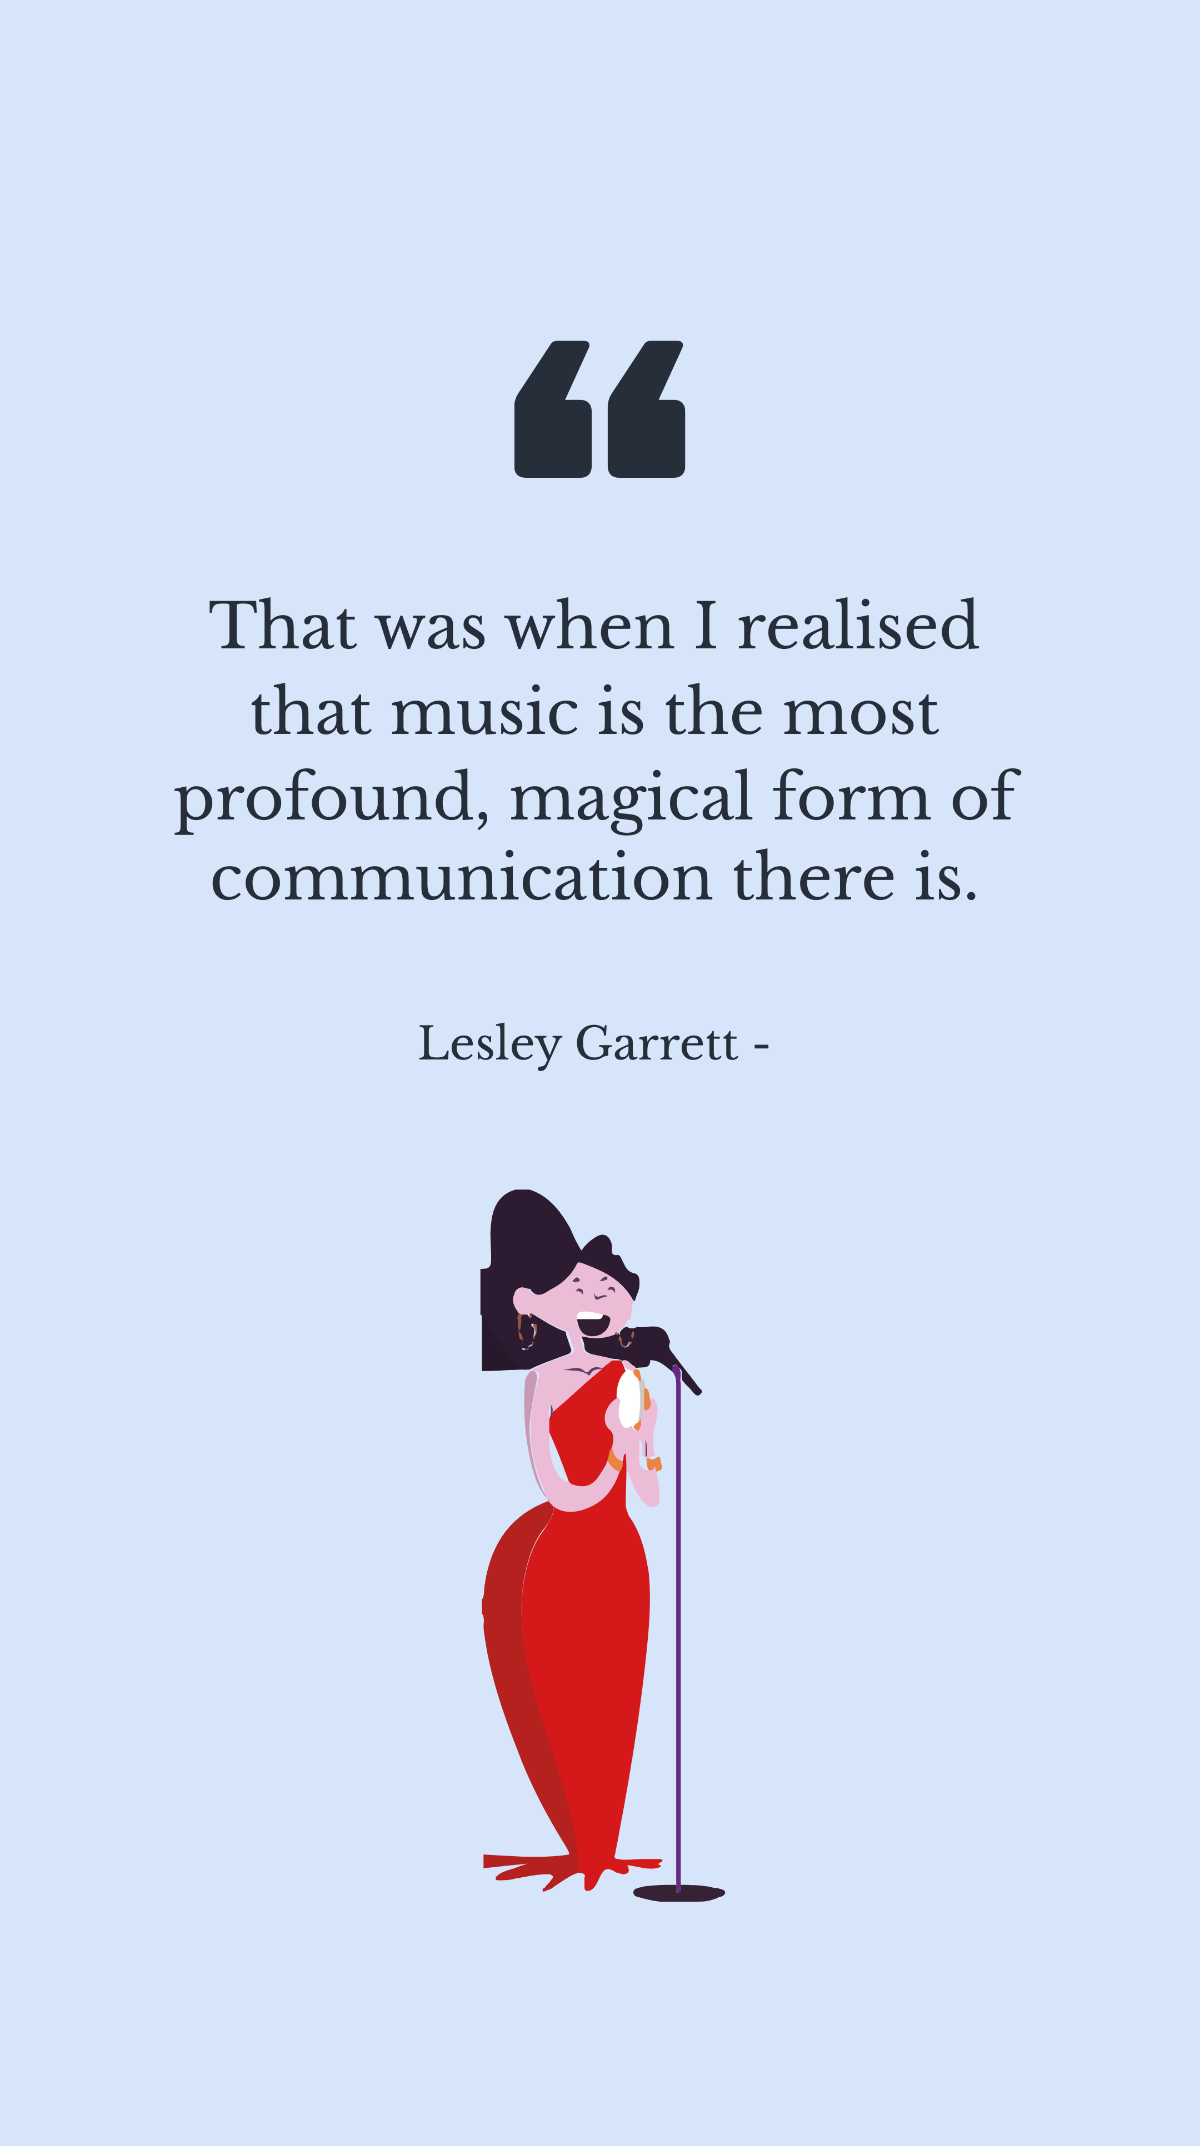 Lesley Garrett - That was when I realised that music is the most profound, magical form of communication there is.